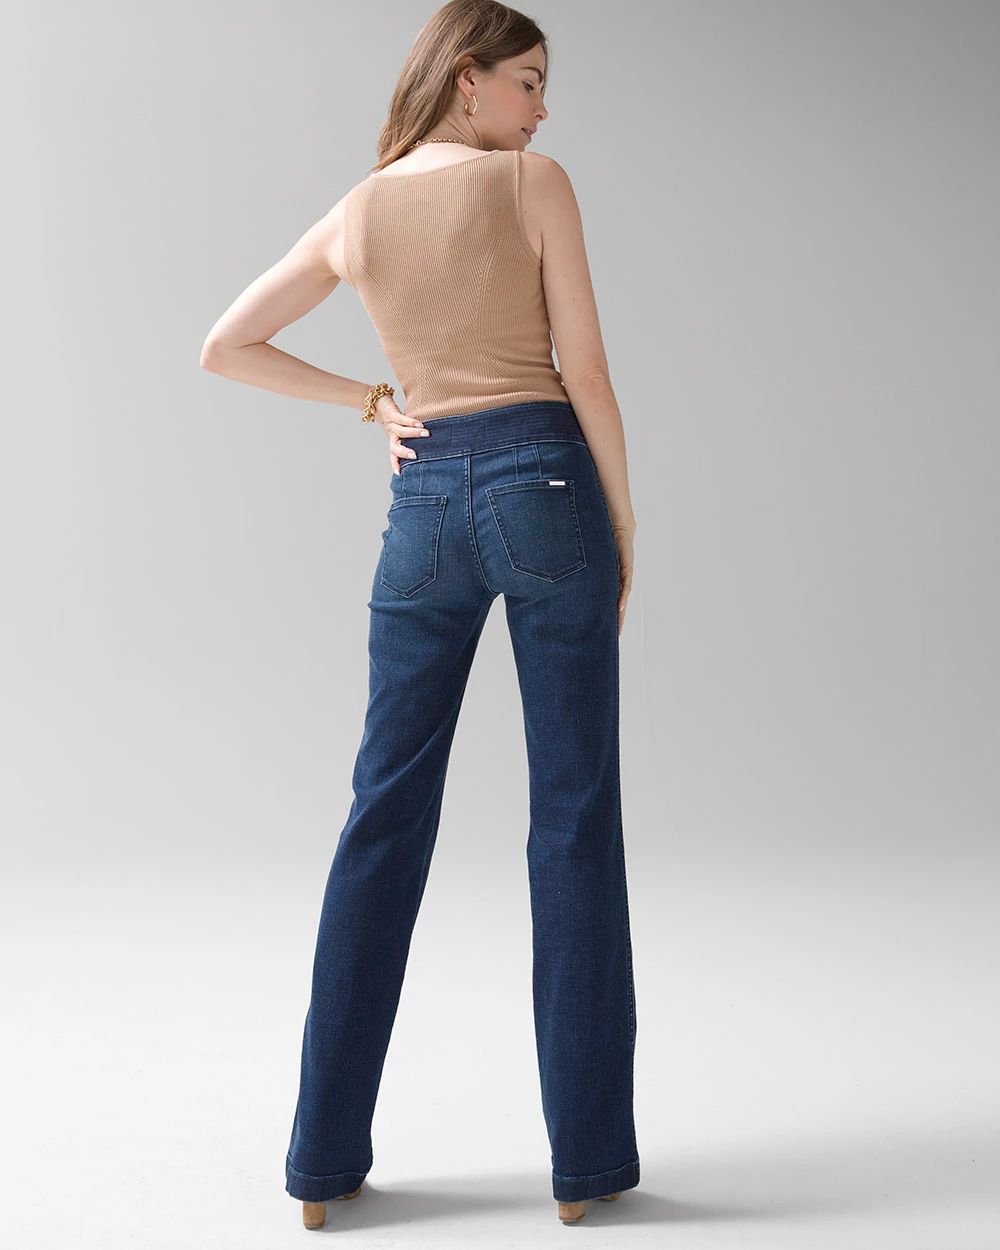 Extra High-Rise Everyday Soft Denim  Trupunto Trouser Jeans click to view larger image.